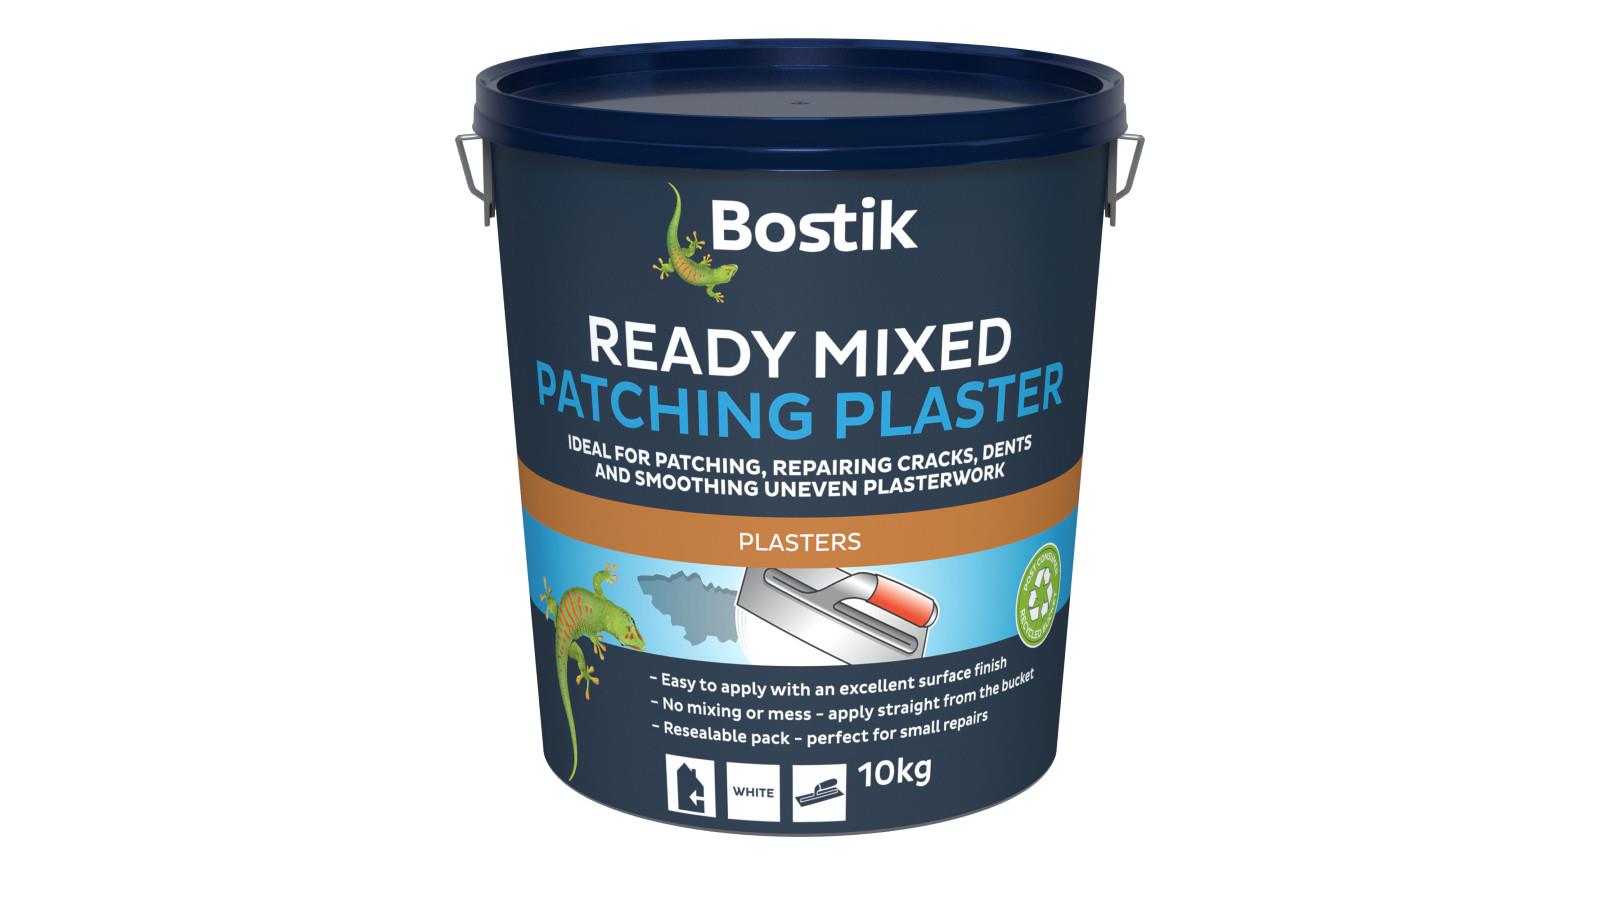 Bostik launches ready to use patching plaster for internal walls and ceilings image